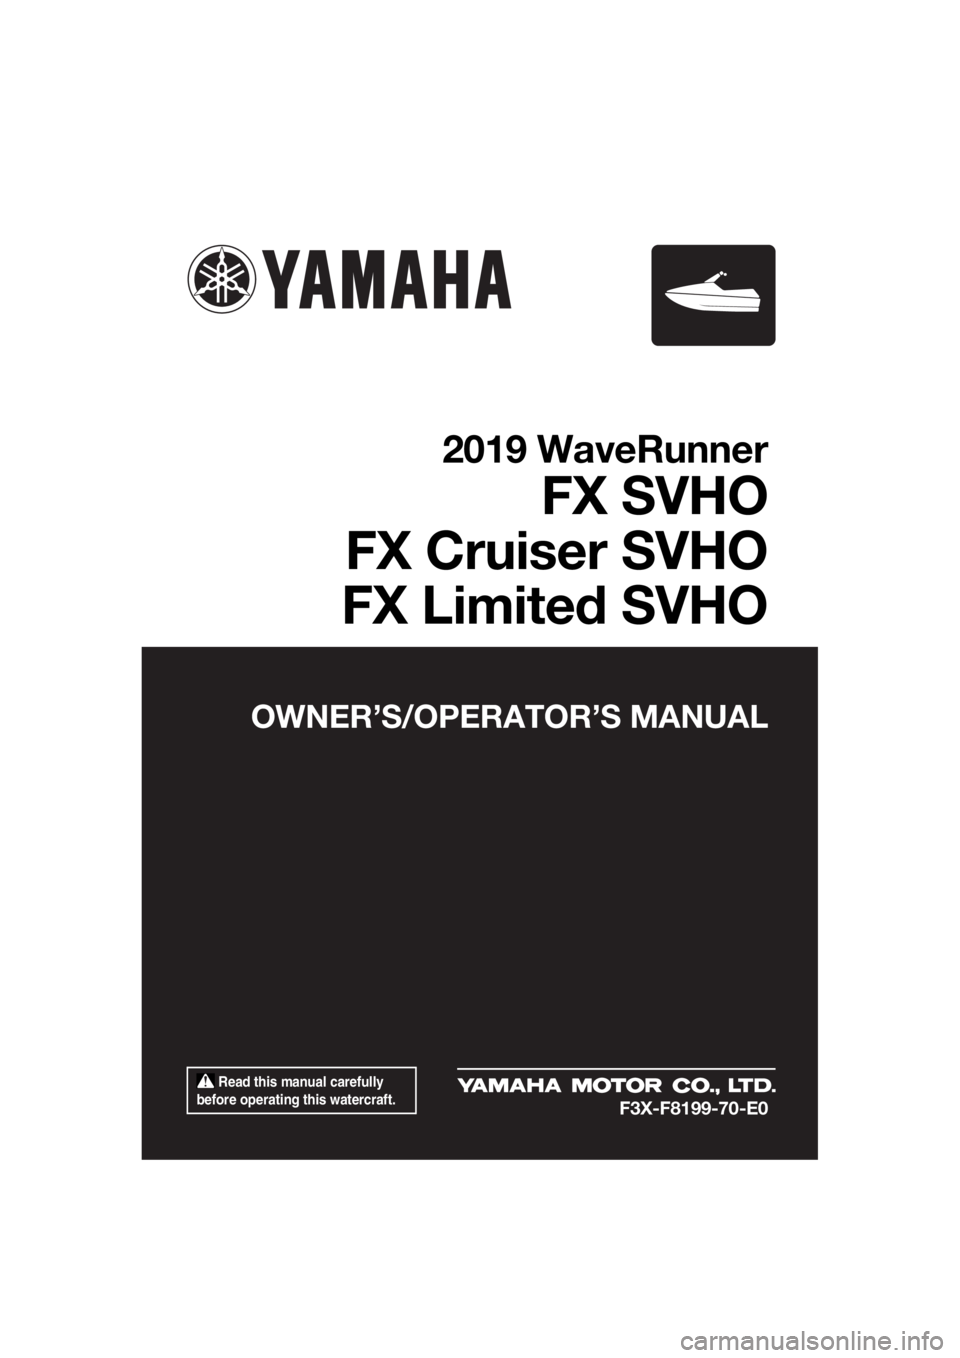 YAMAHA FX SVHO 2019  Owners Manual  Read this manual carefully 
before operating this watercraft.
OWNER’S/OPERATOR’S MANUAL
2019 WaveRunner
FX SVHO
FX Cruiser SVHO
FX Limited SVHO
F3X-F8199-70-E0
UF3X70E0.book  Page 1  Friday, Augu